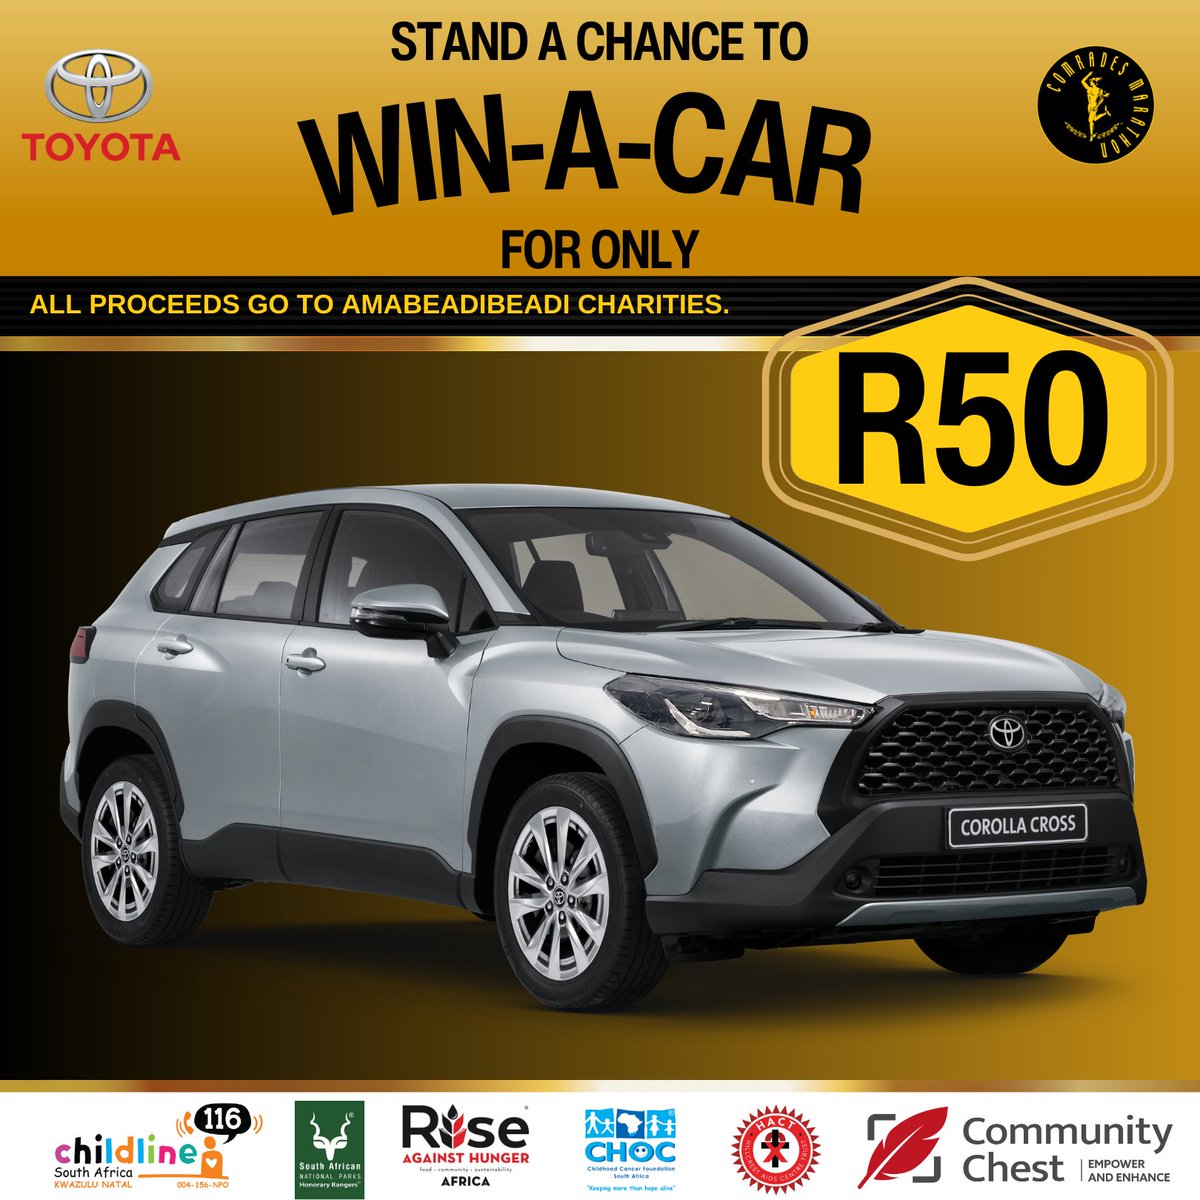 Stand a chance to win a spectacular Toyota Corolla Cross 1.8 Xi CVT on Comrades race day. Buy your raffle ticket today for only R50 from any of the six Comrades official charities or via the Comrades website comrades.com